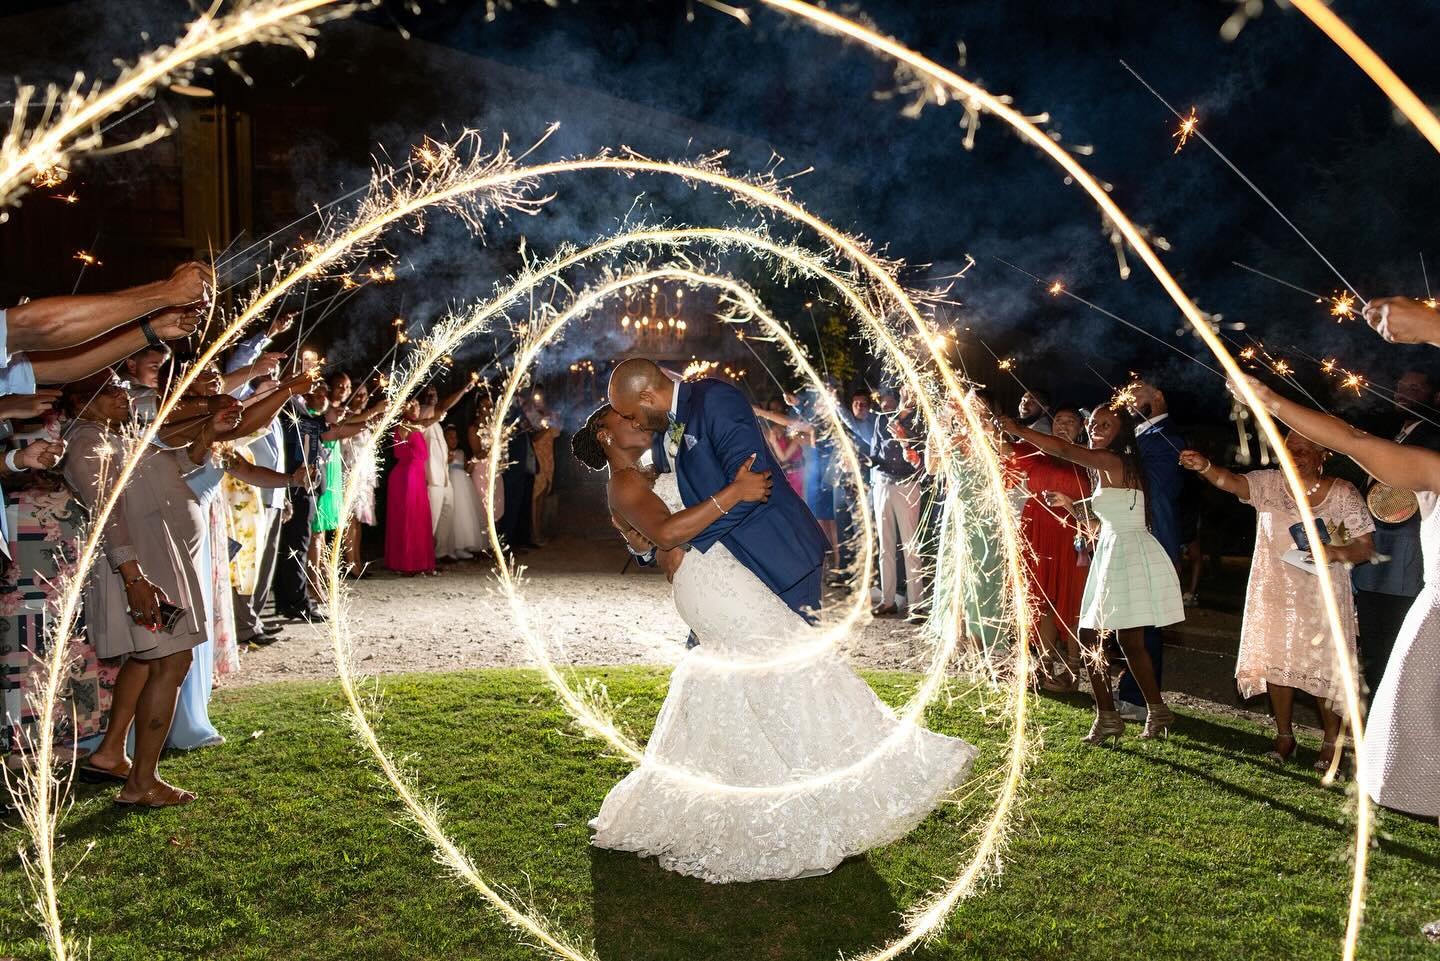 Lighting up the night with love ✨✨
Saturday soir&eacute;es at Vinewood Stables end in sparkling style with unforgettable exits! Congratulations to the happy couple and cheers to new beginnings! 🥂 
#SparklerExit #WeddingMagic #SaturdayNightLights #Sp